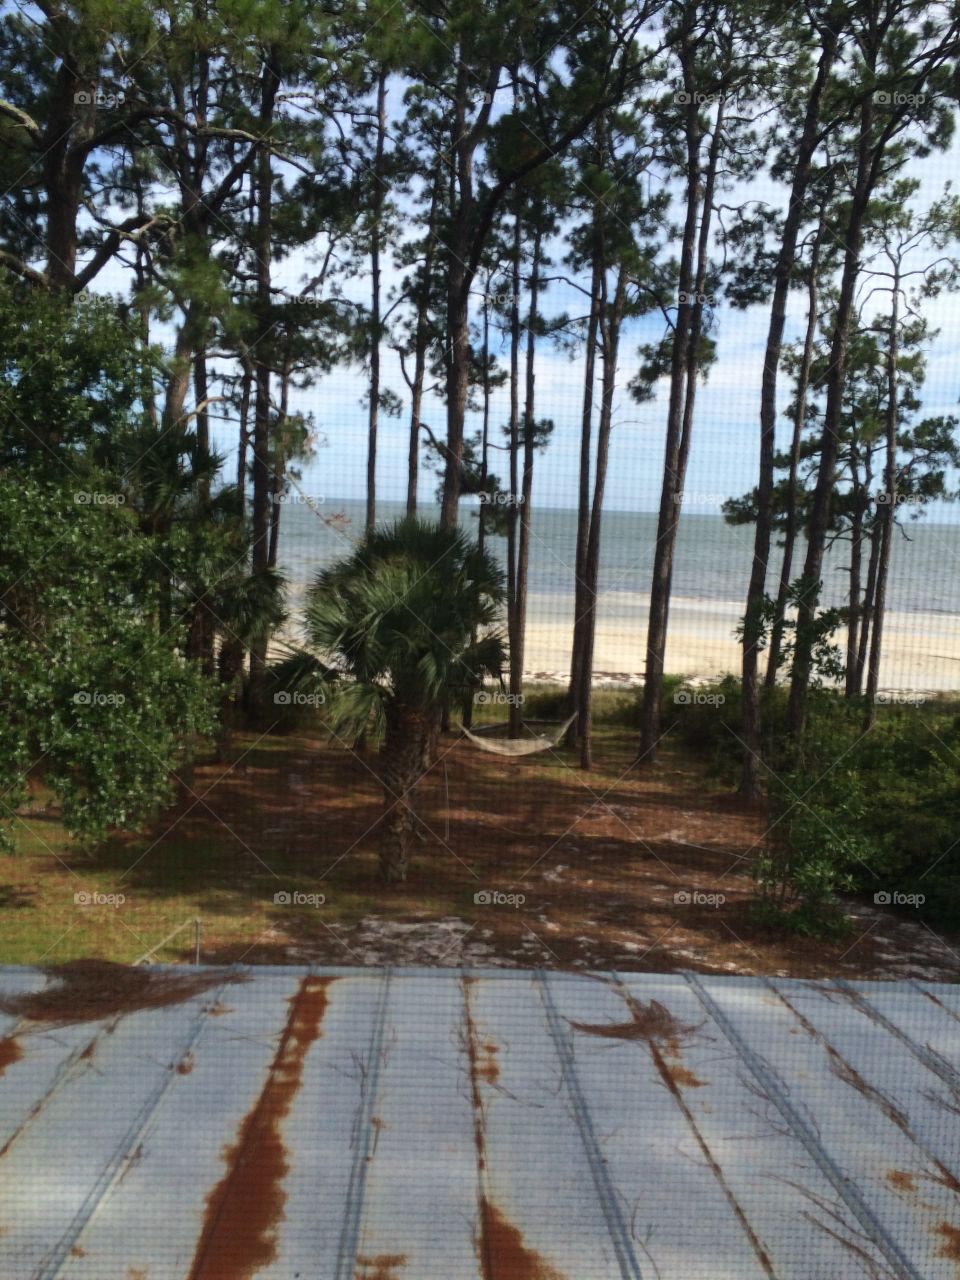 Beach view from rental house in Florida 